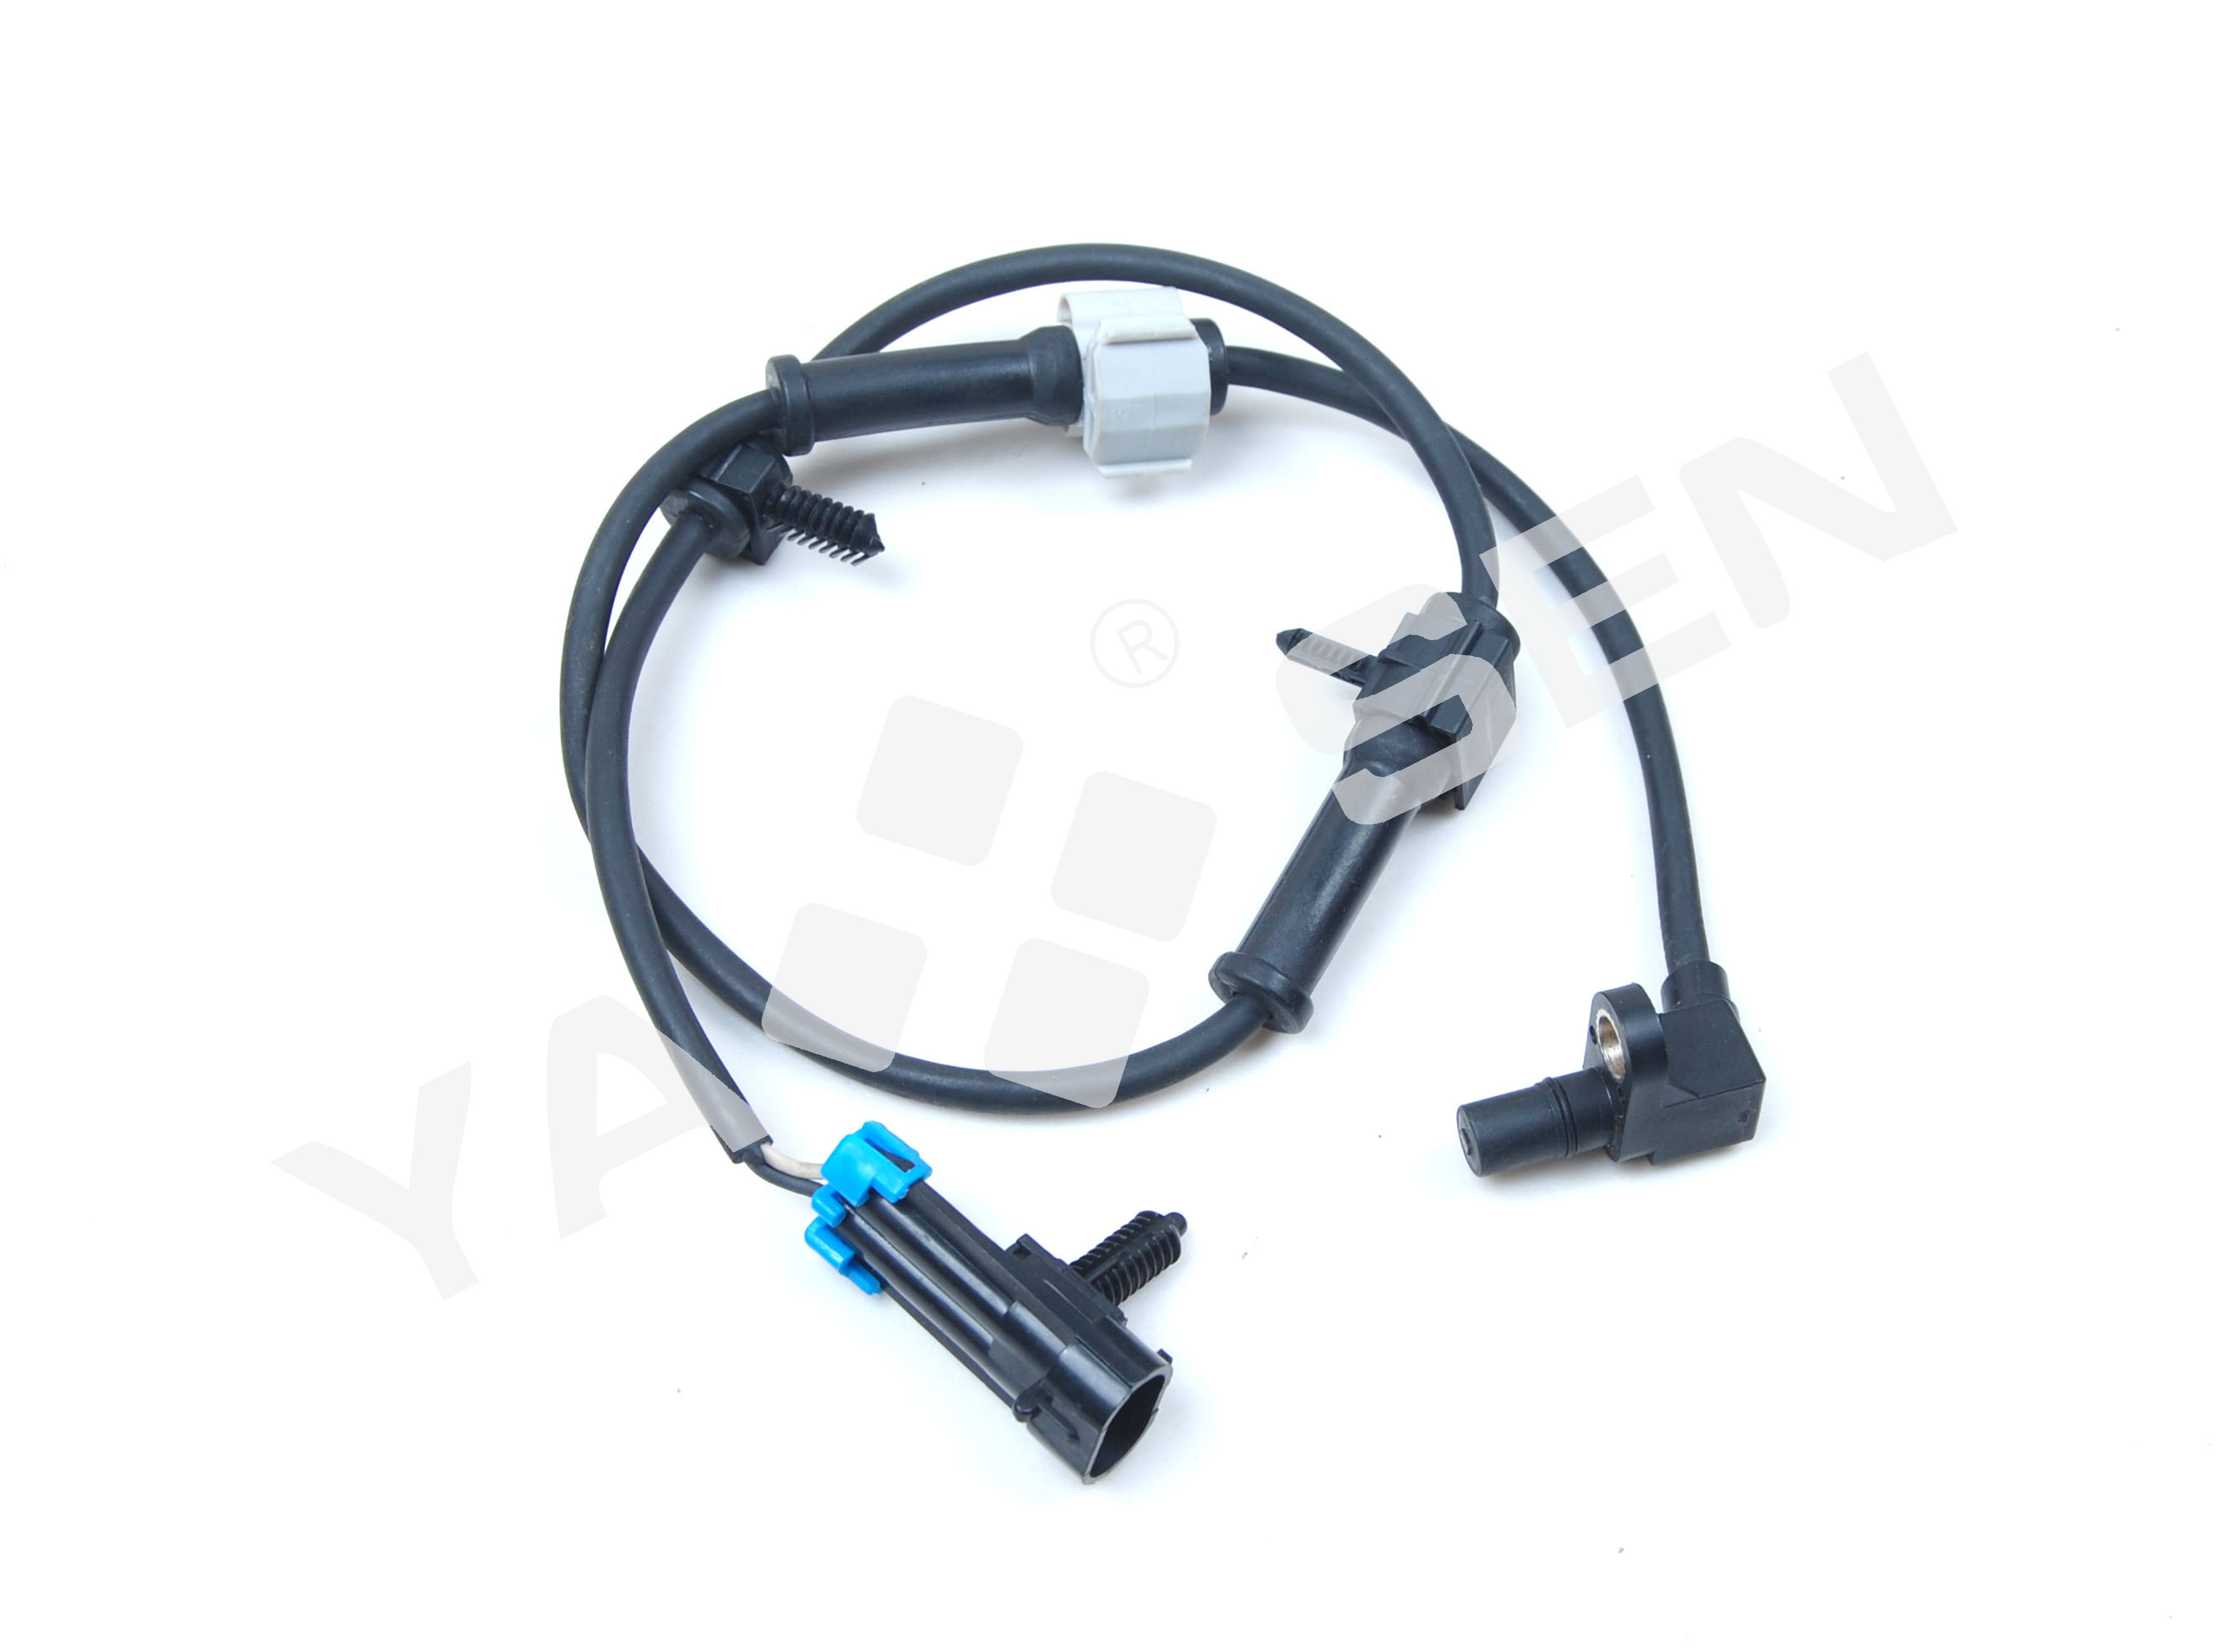 ABS Wheel Speed Sensor for FORD/GMC, SU9825 5S8363 ALS530 970063 AB2018 2ABS2267 15716205